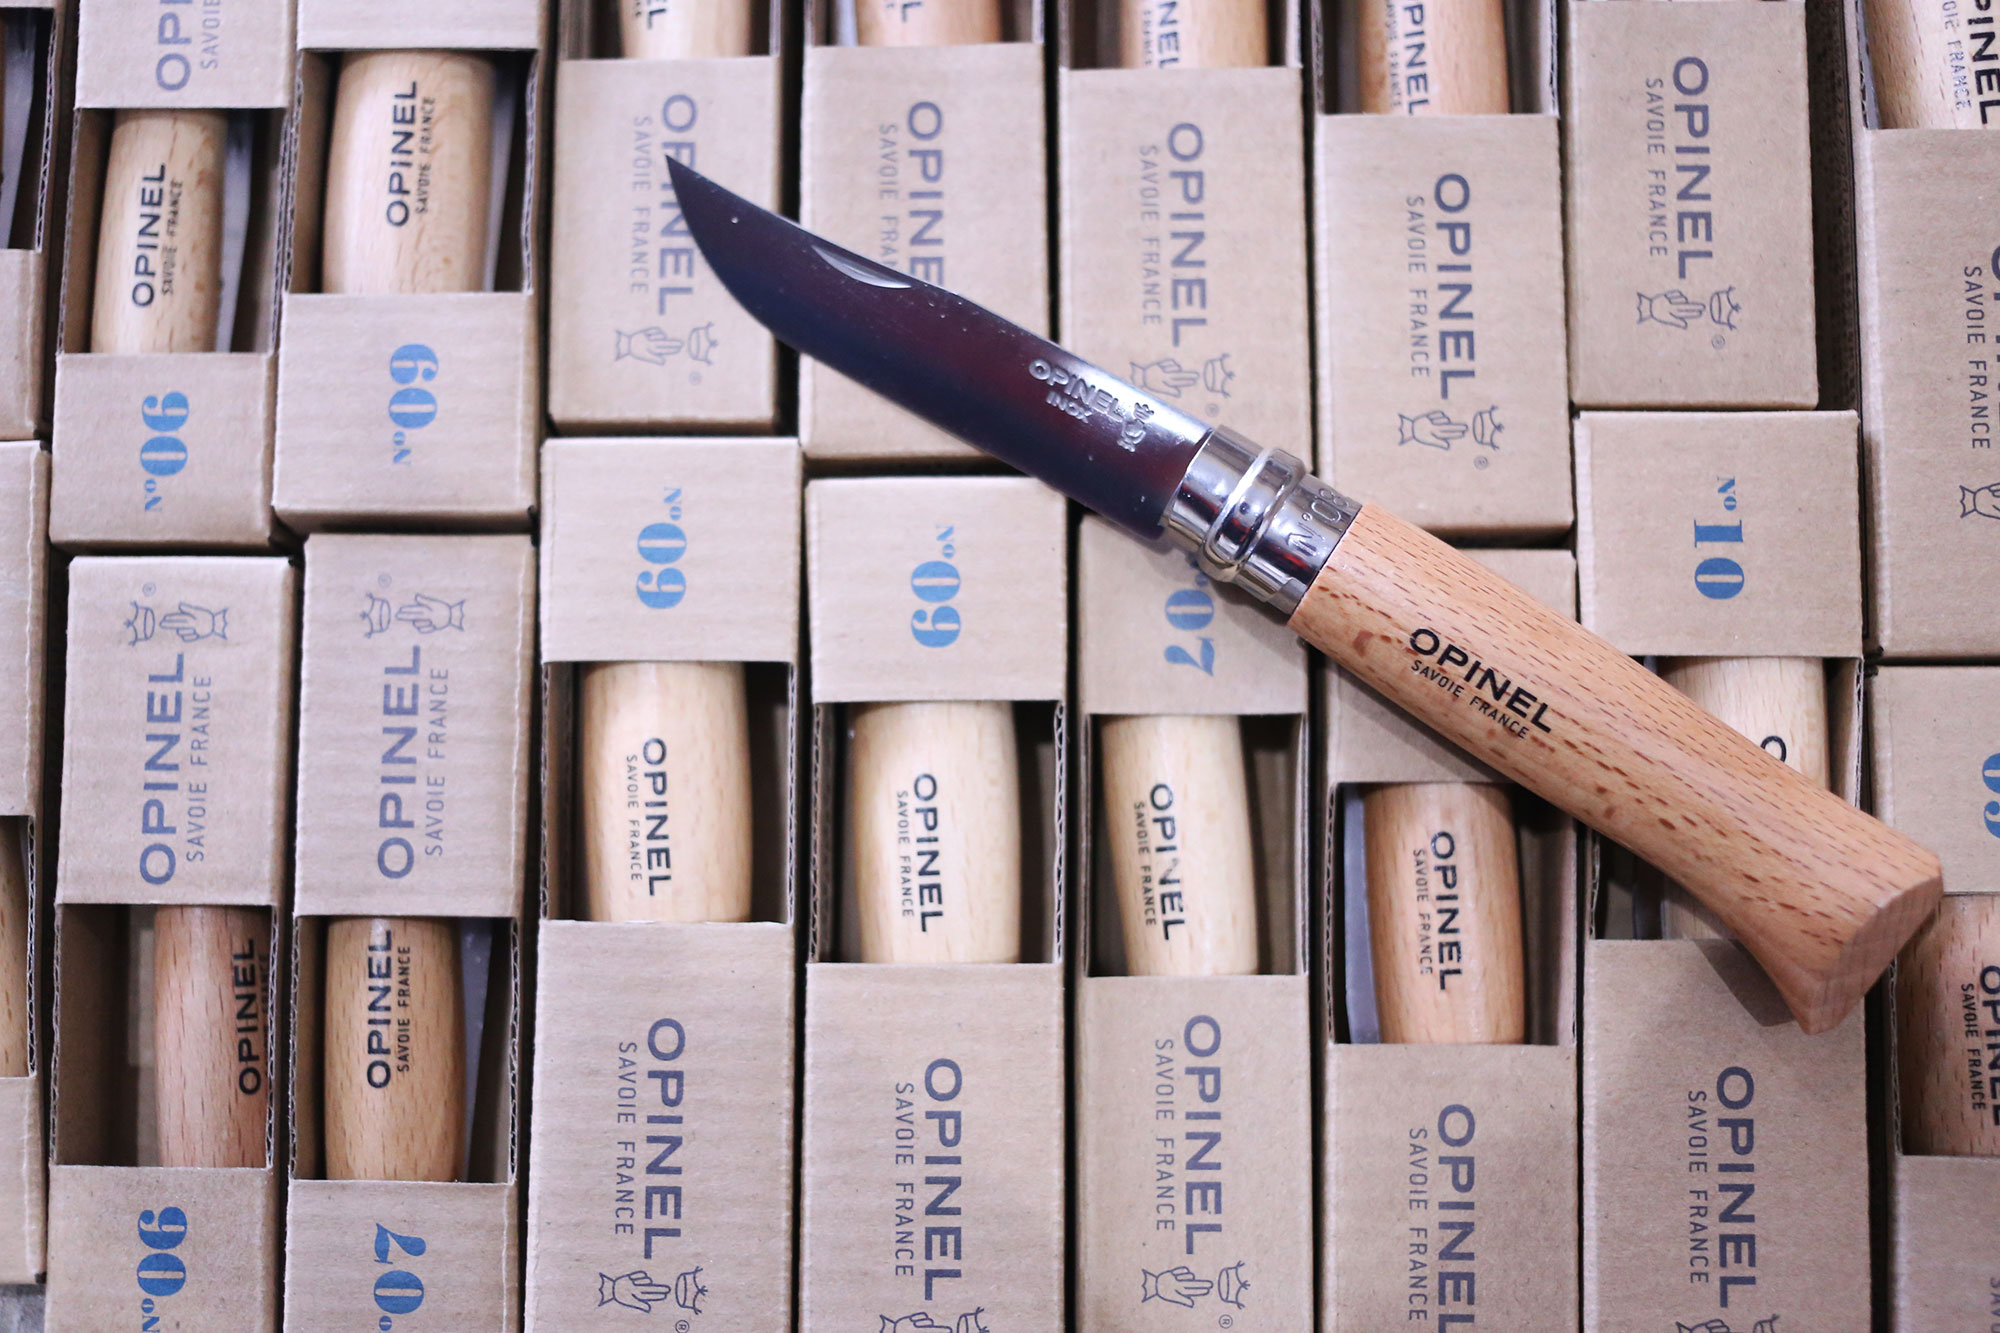 OPINEL Stainless Steel Knife